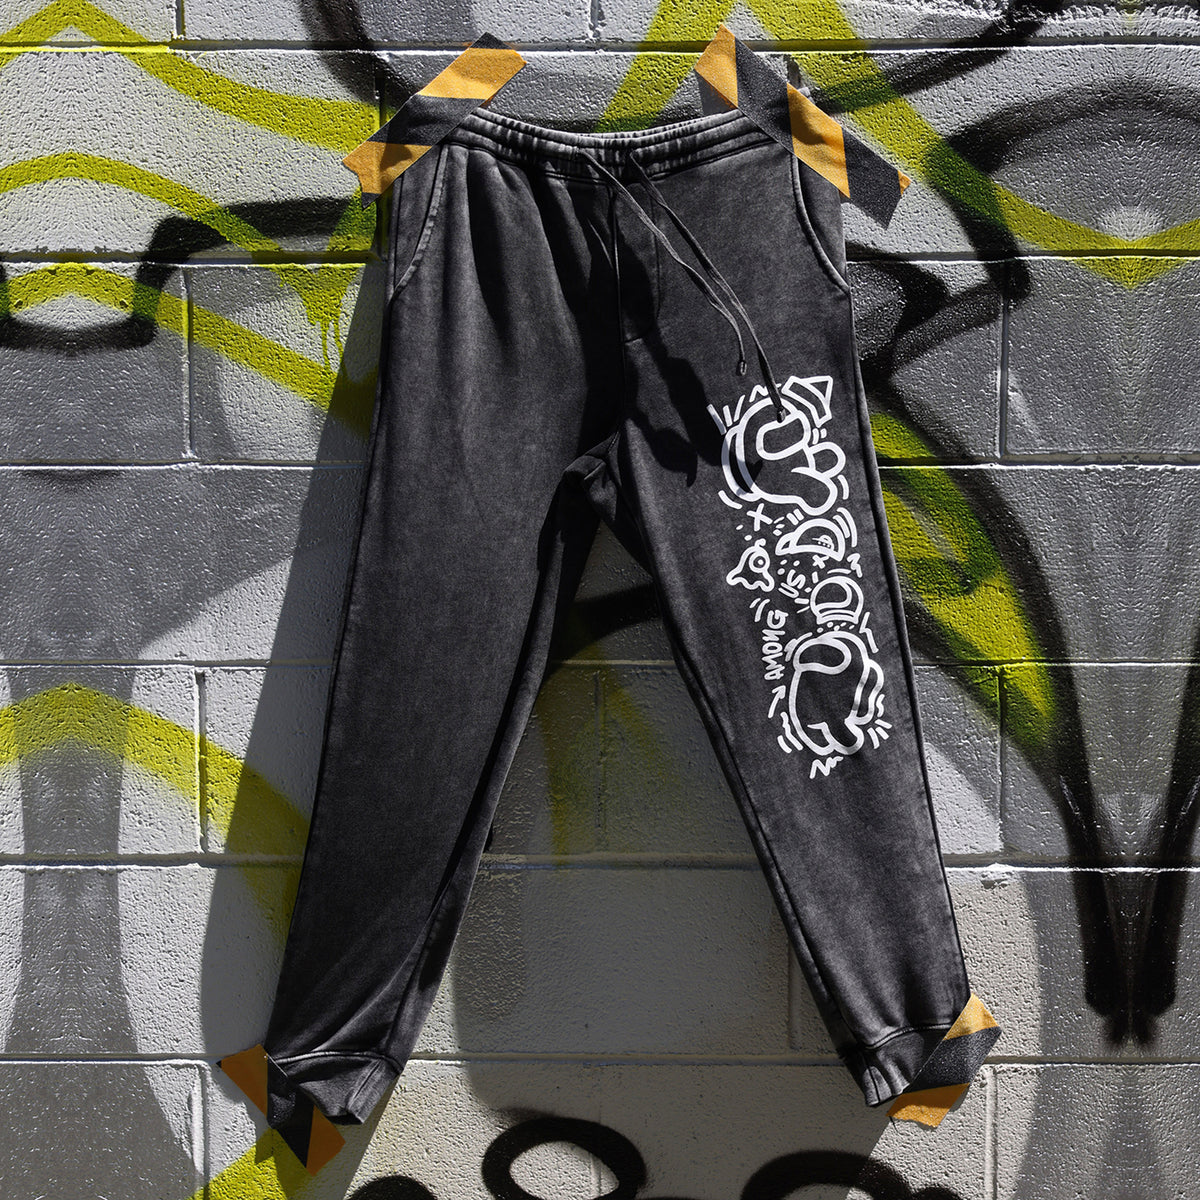 A photograph of the gray joggers laid flat and taped to a graffitied wall. The joggers are being held to the wall by yellow and black caution tape.